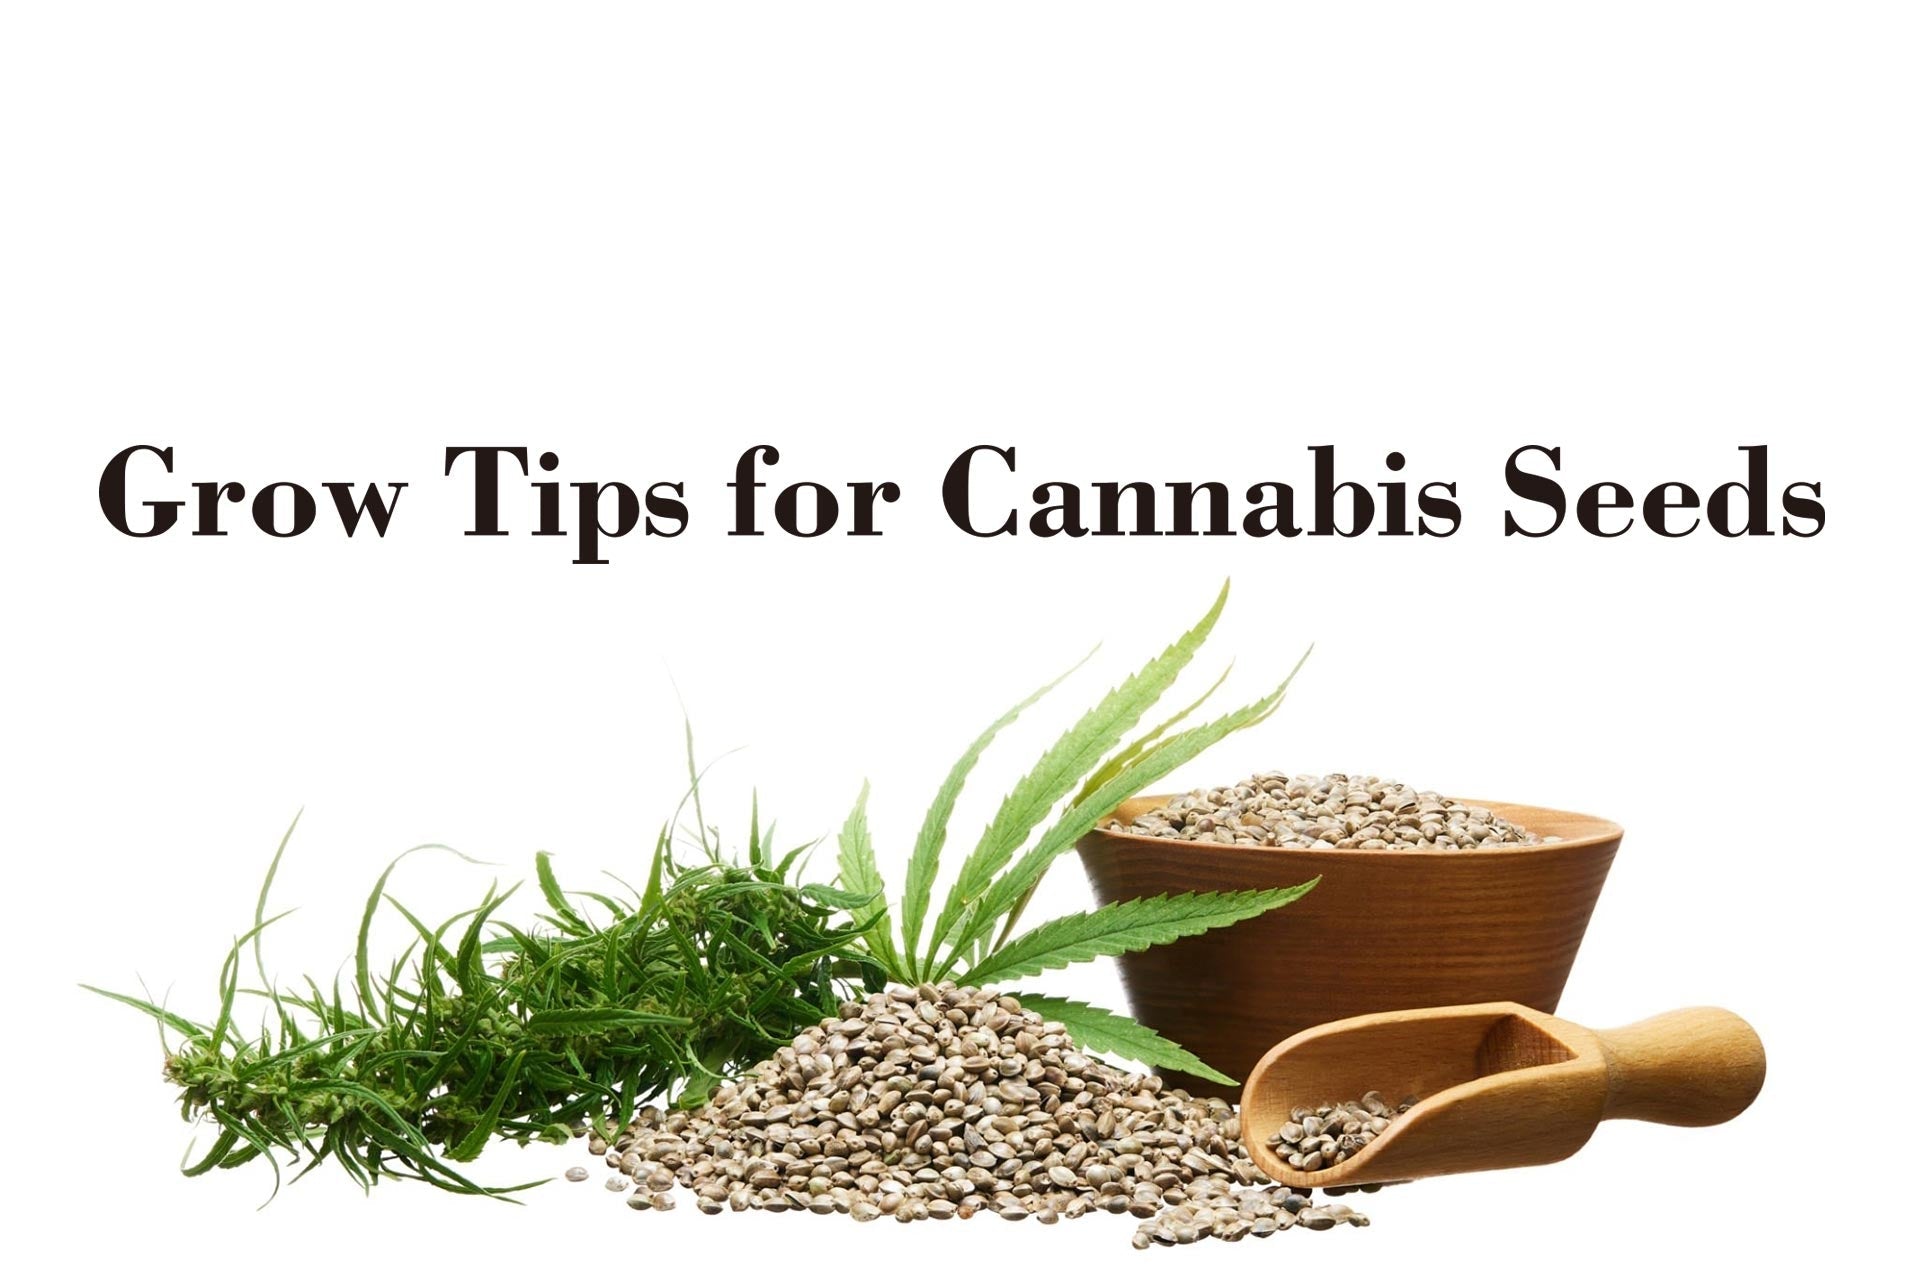 Growing Tips for Cannabis Seeds